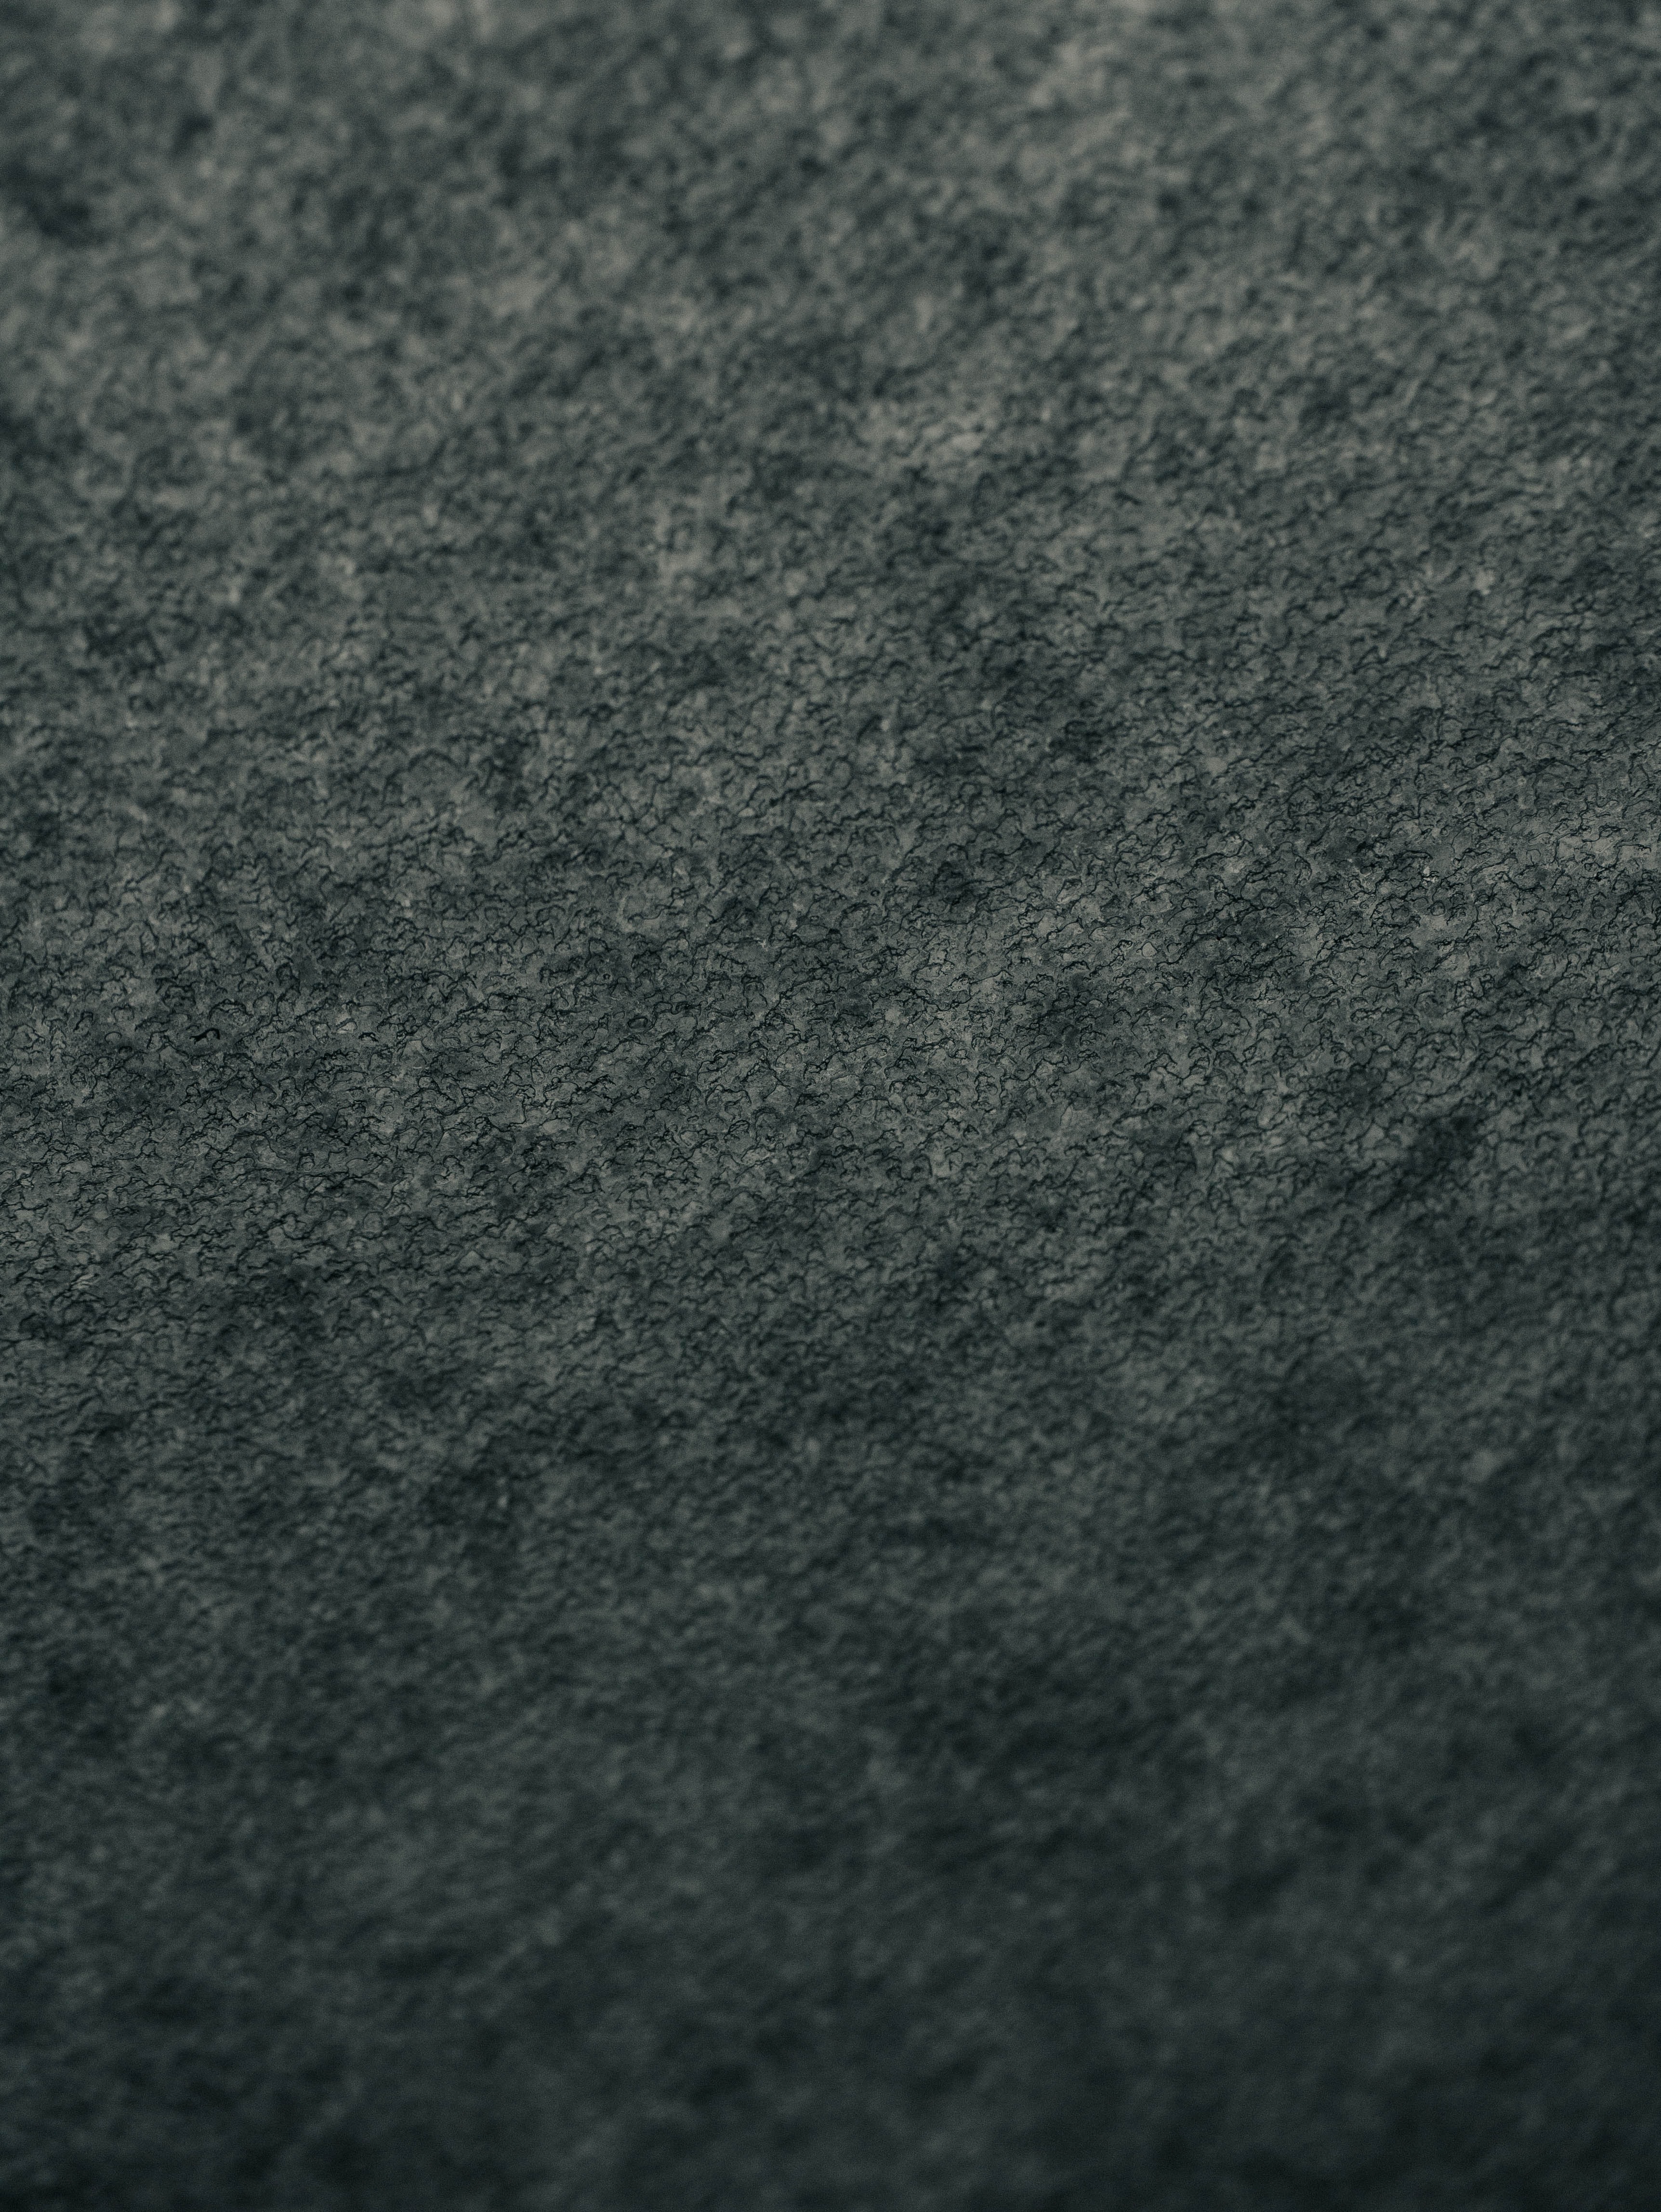 surface, texture, textures, relief, grey, rough, rugged iphone wallpaper